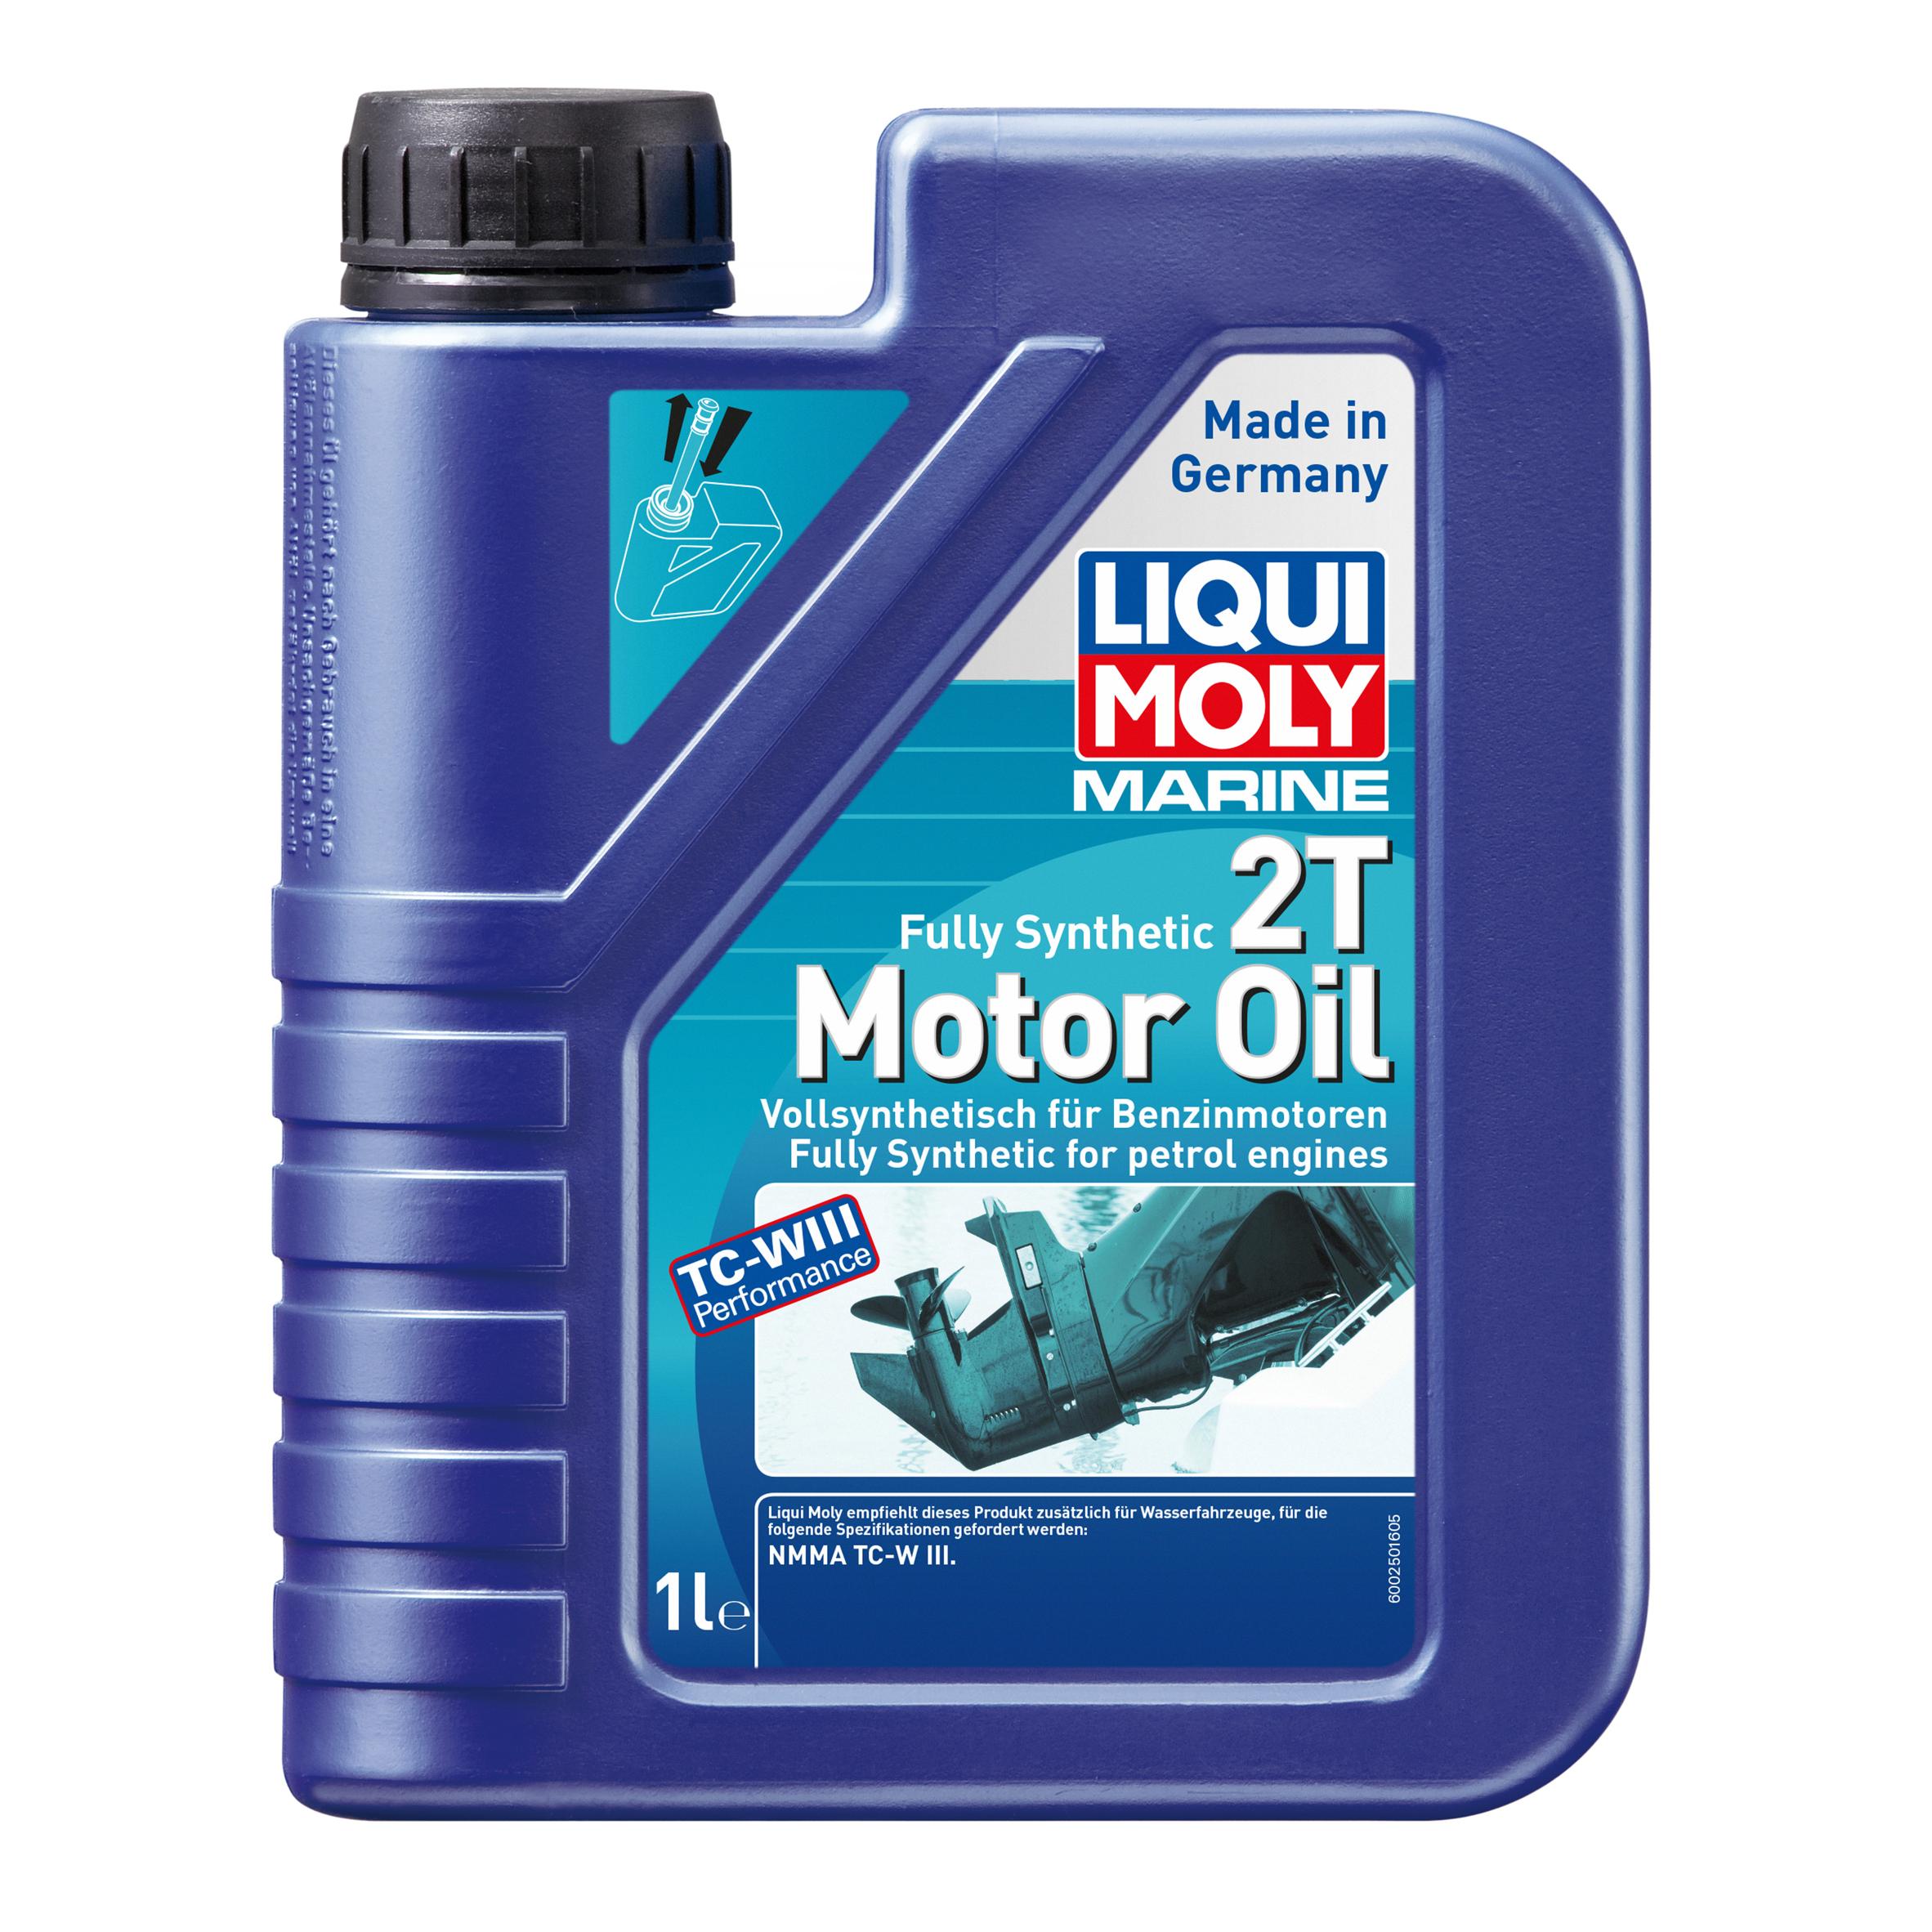 Масло моторное Liqui Moly Marine Fully Synthetic 2T Motor Oil